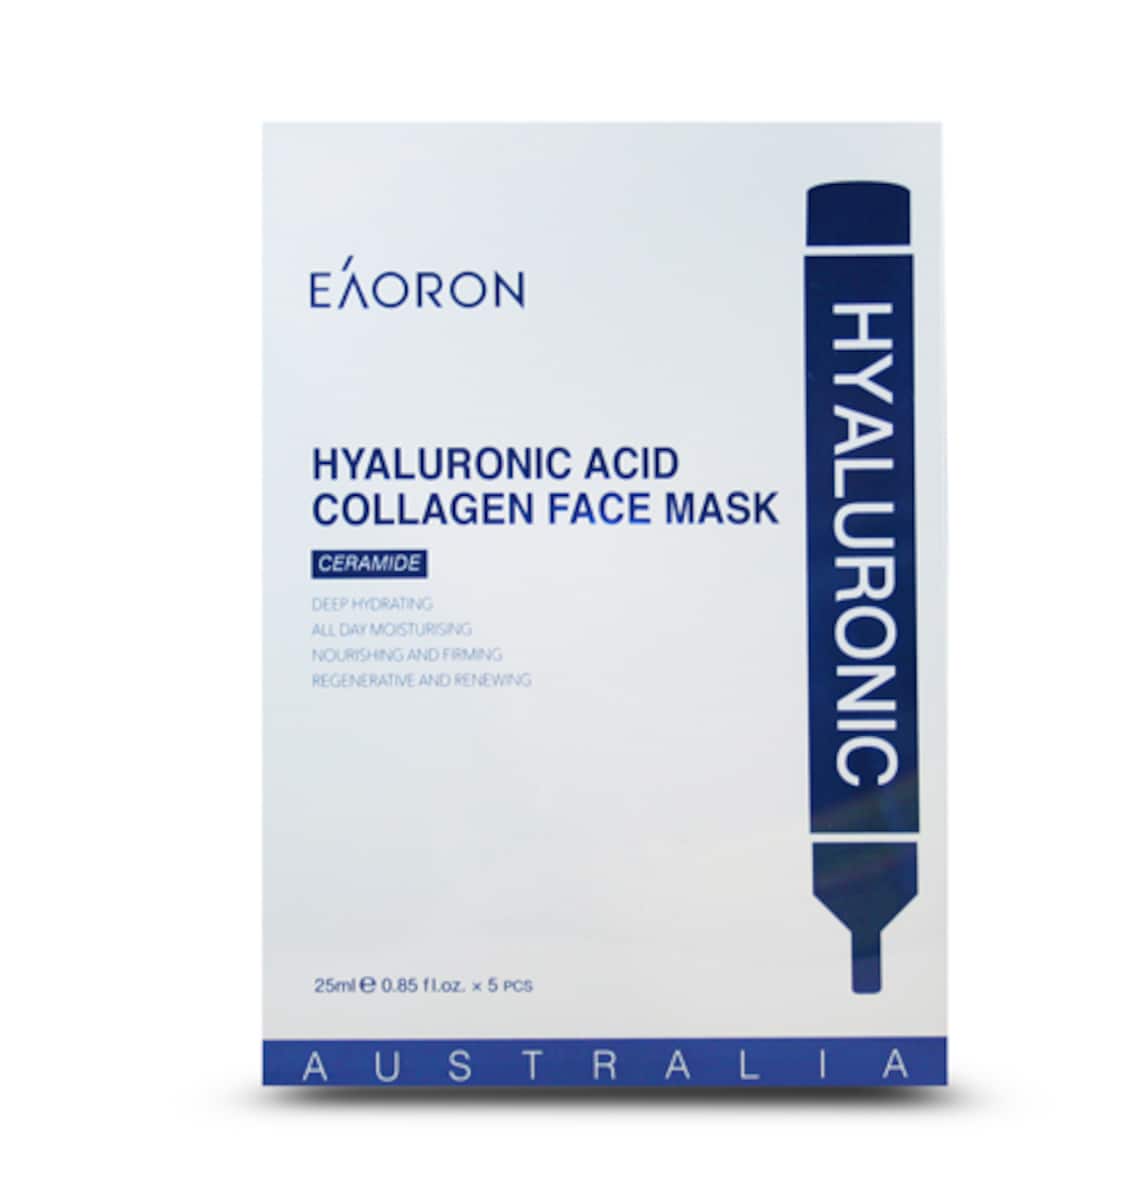 Eaoron Hyaluronic Acid Collagen Hydrating Face Mask 5 Pack